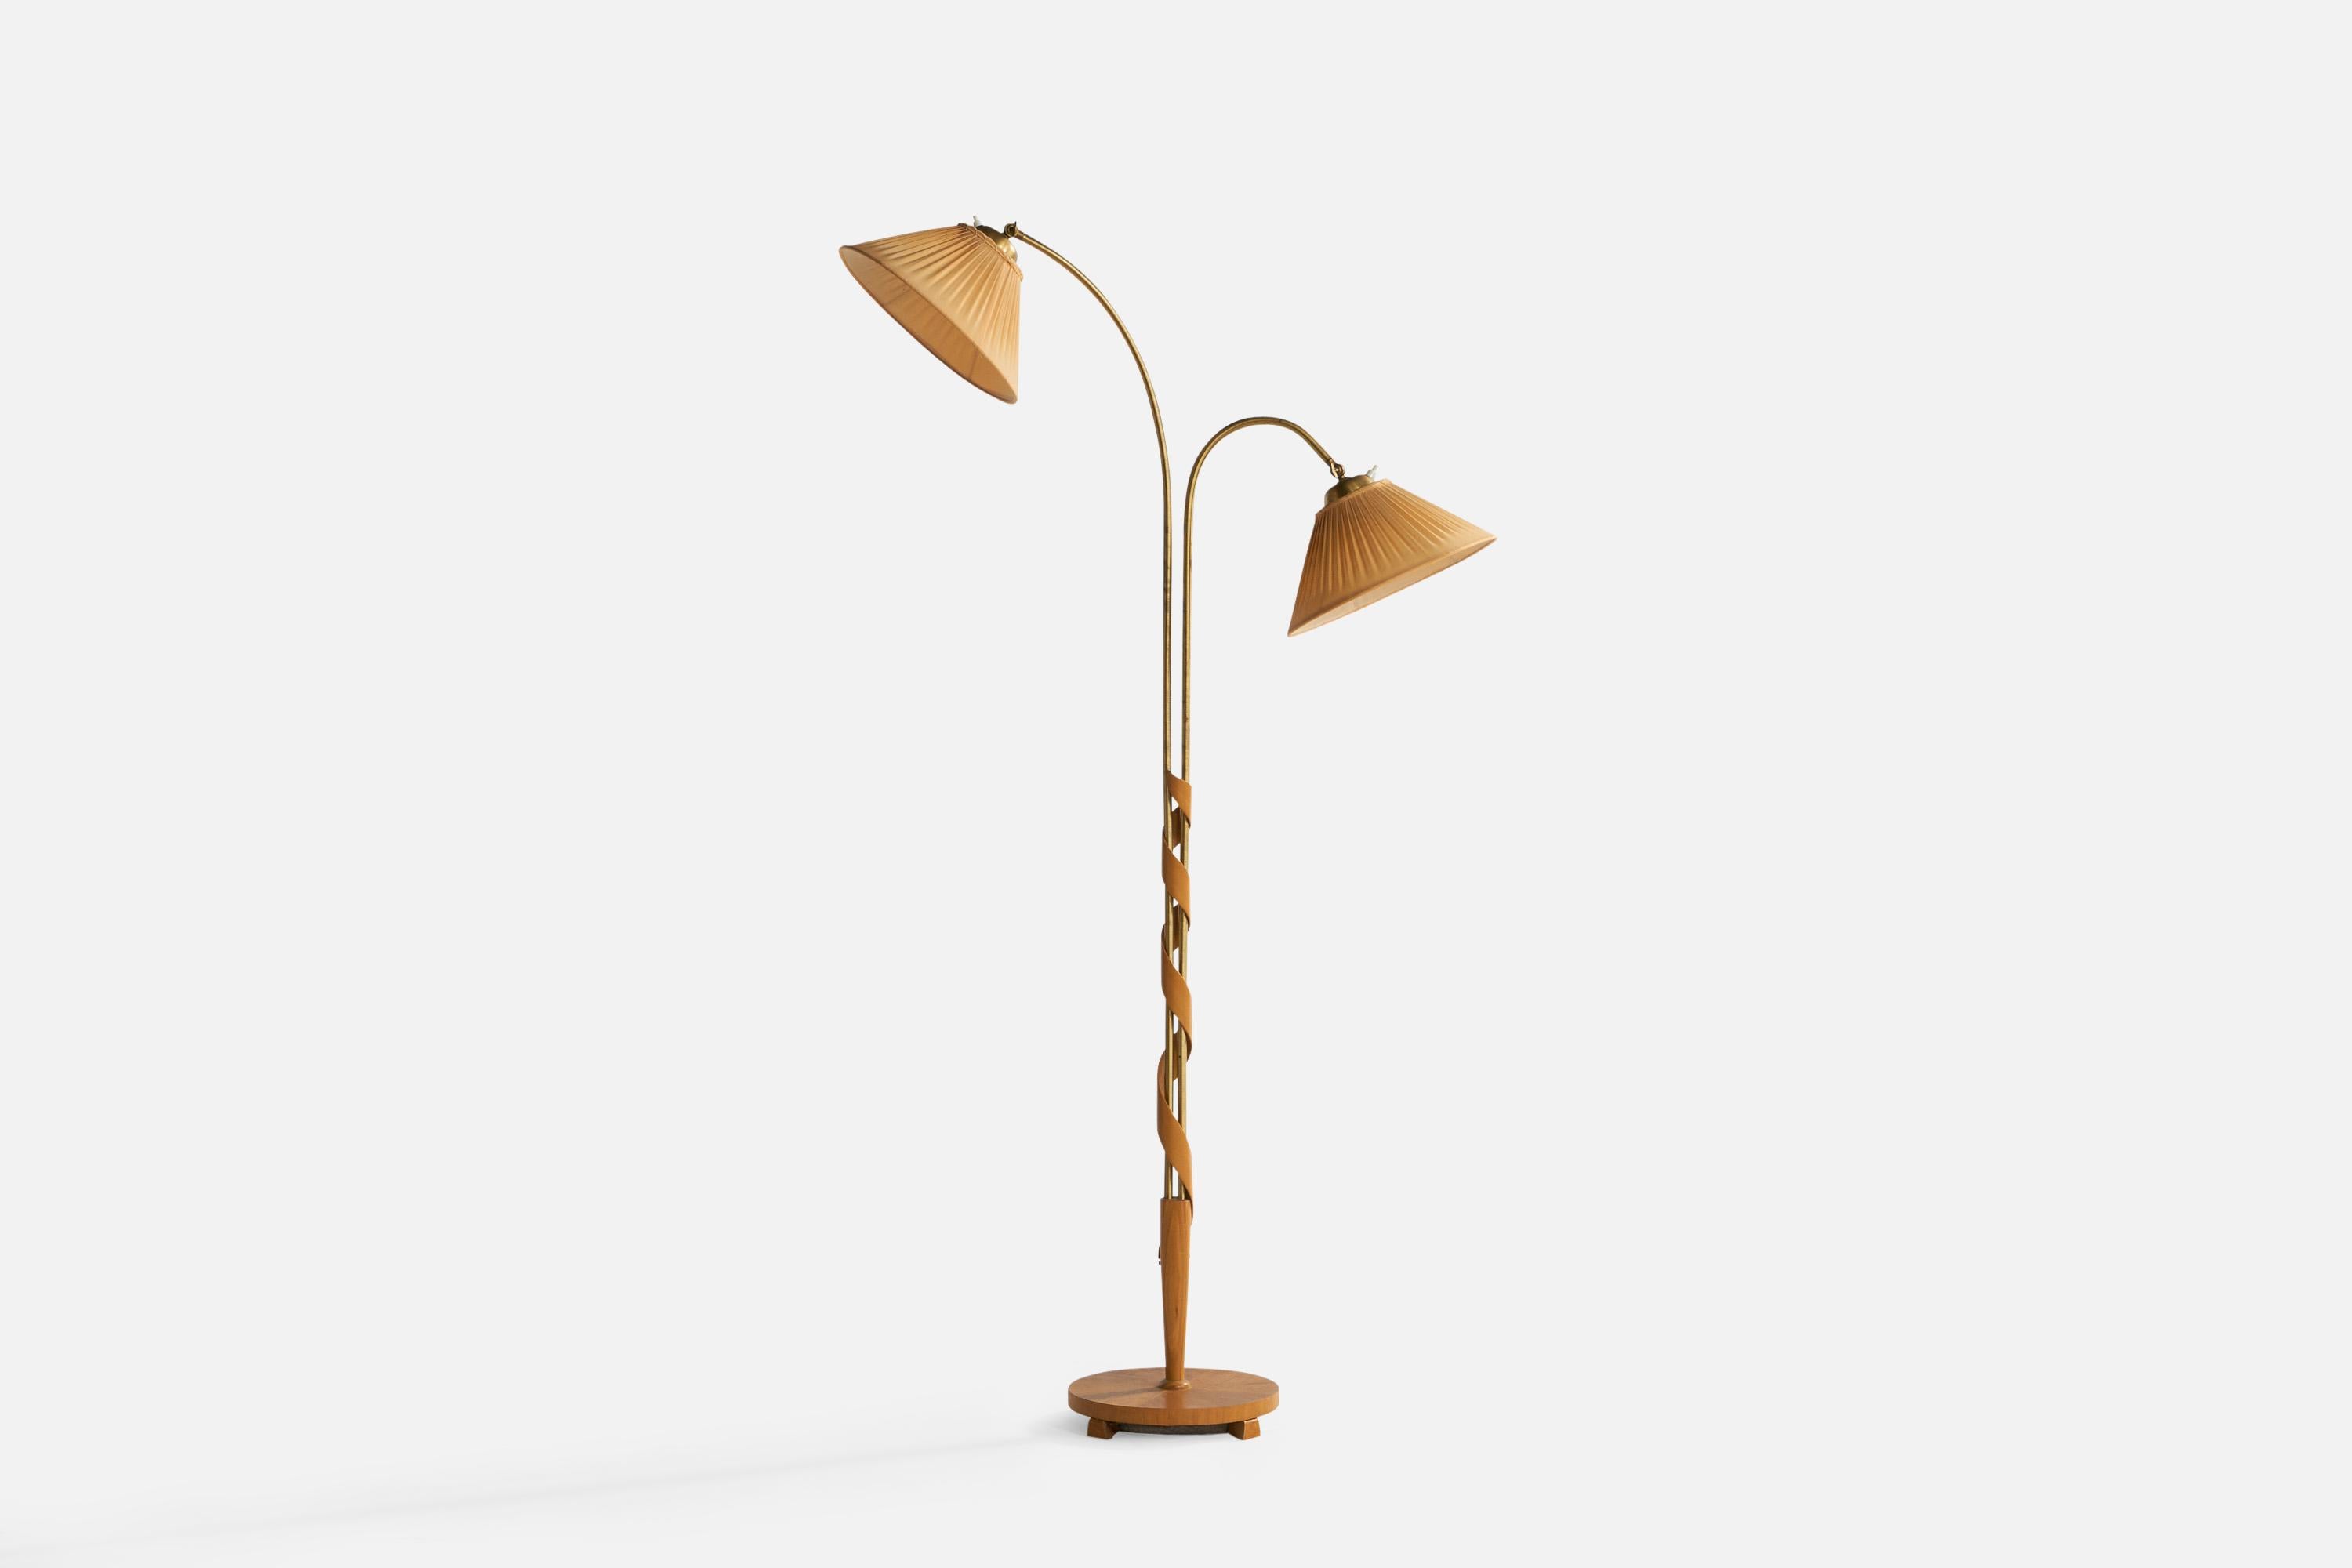 An adjustable two-armed brass, elm and beige fabric floor lamp designed and produced in Sweden, c. 1930s.

Overall Dimensions (inches): 64.7” H x 33.5” W x 12” Depth. Stated dimensions include shade.
Dimensions vary based on position of light.